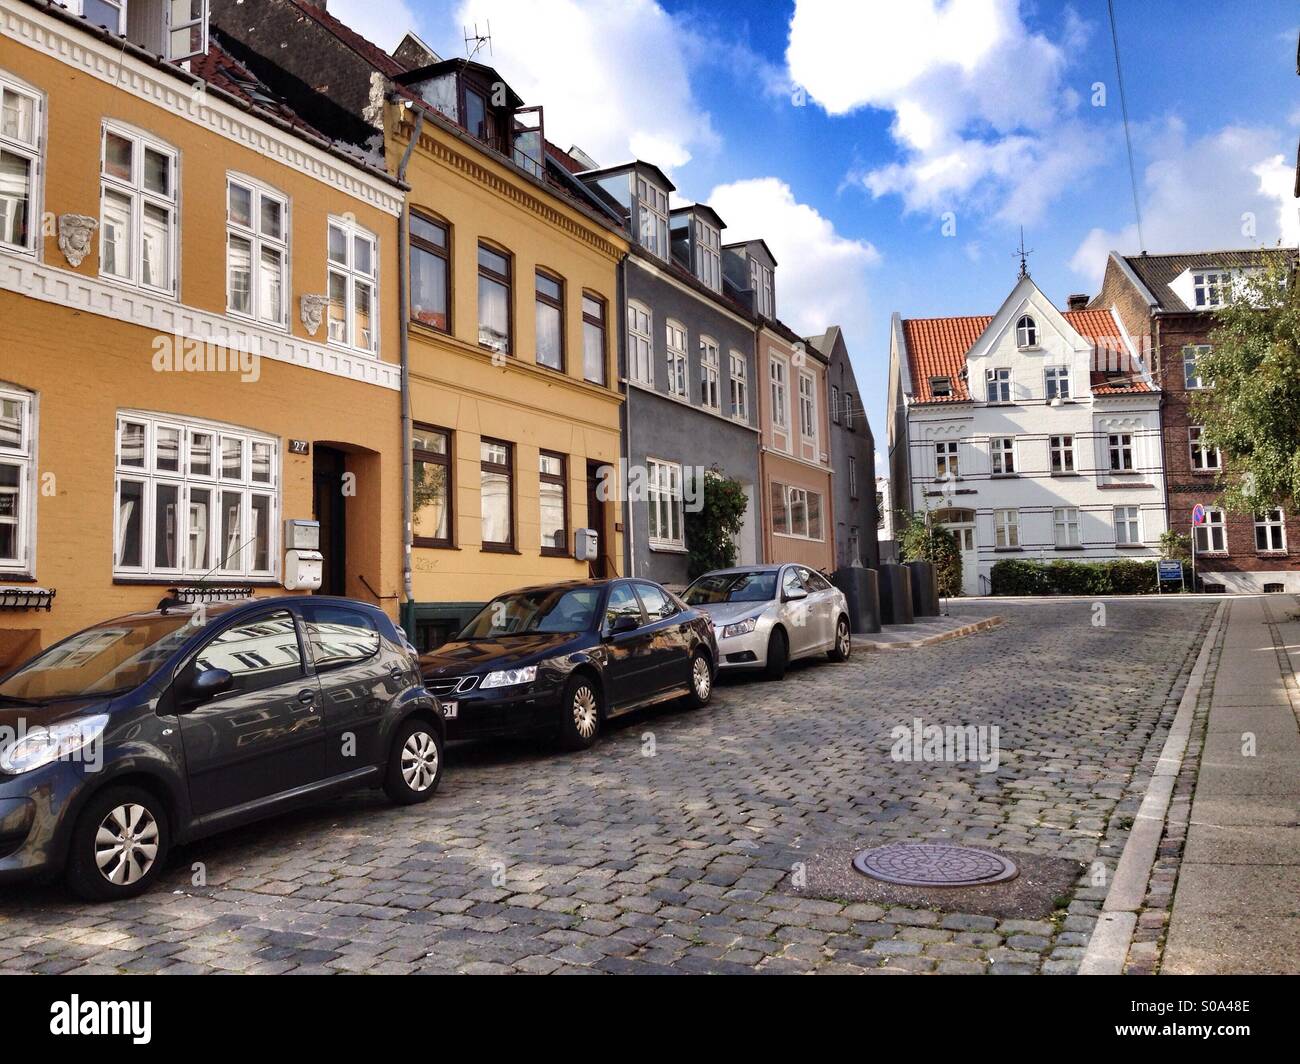 Scandinavian city scene, colored houses in a narrow stone street in a sunny day, with a blue sky with a few clouds, in the center of Aarhus, Jutland peninsula, Denmark Stock Photo